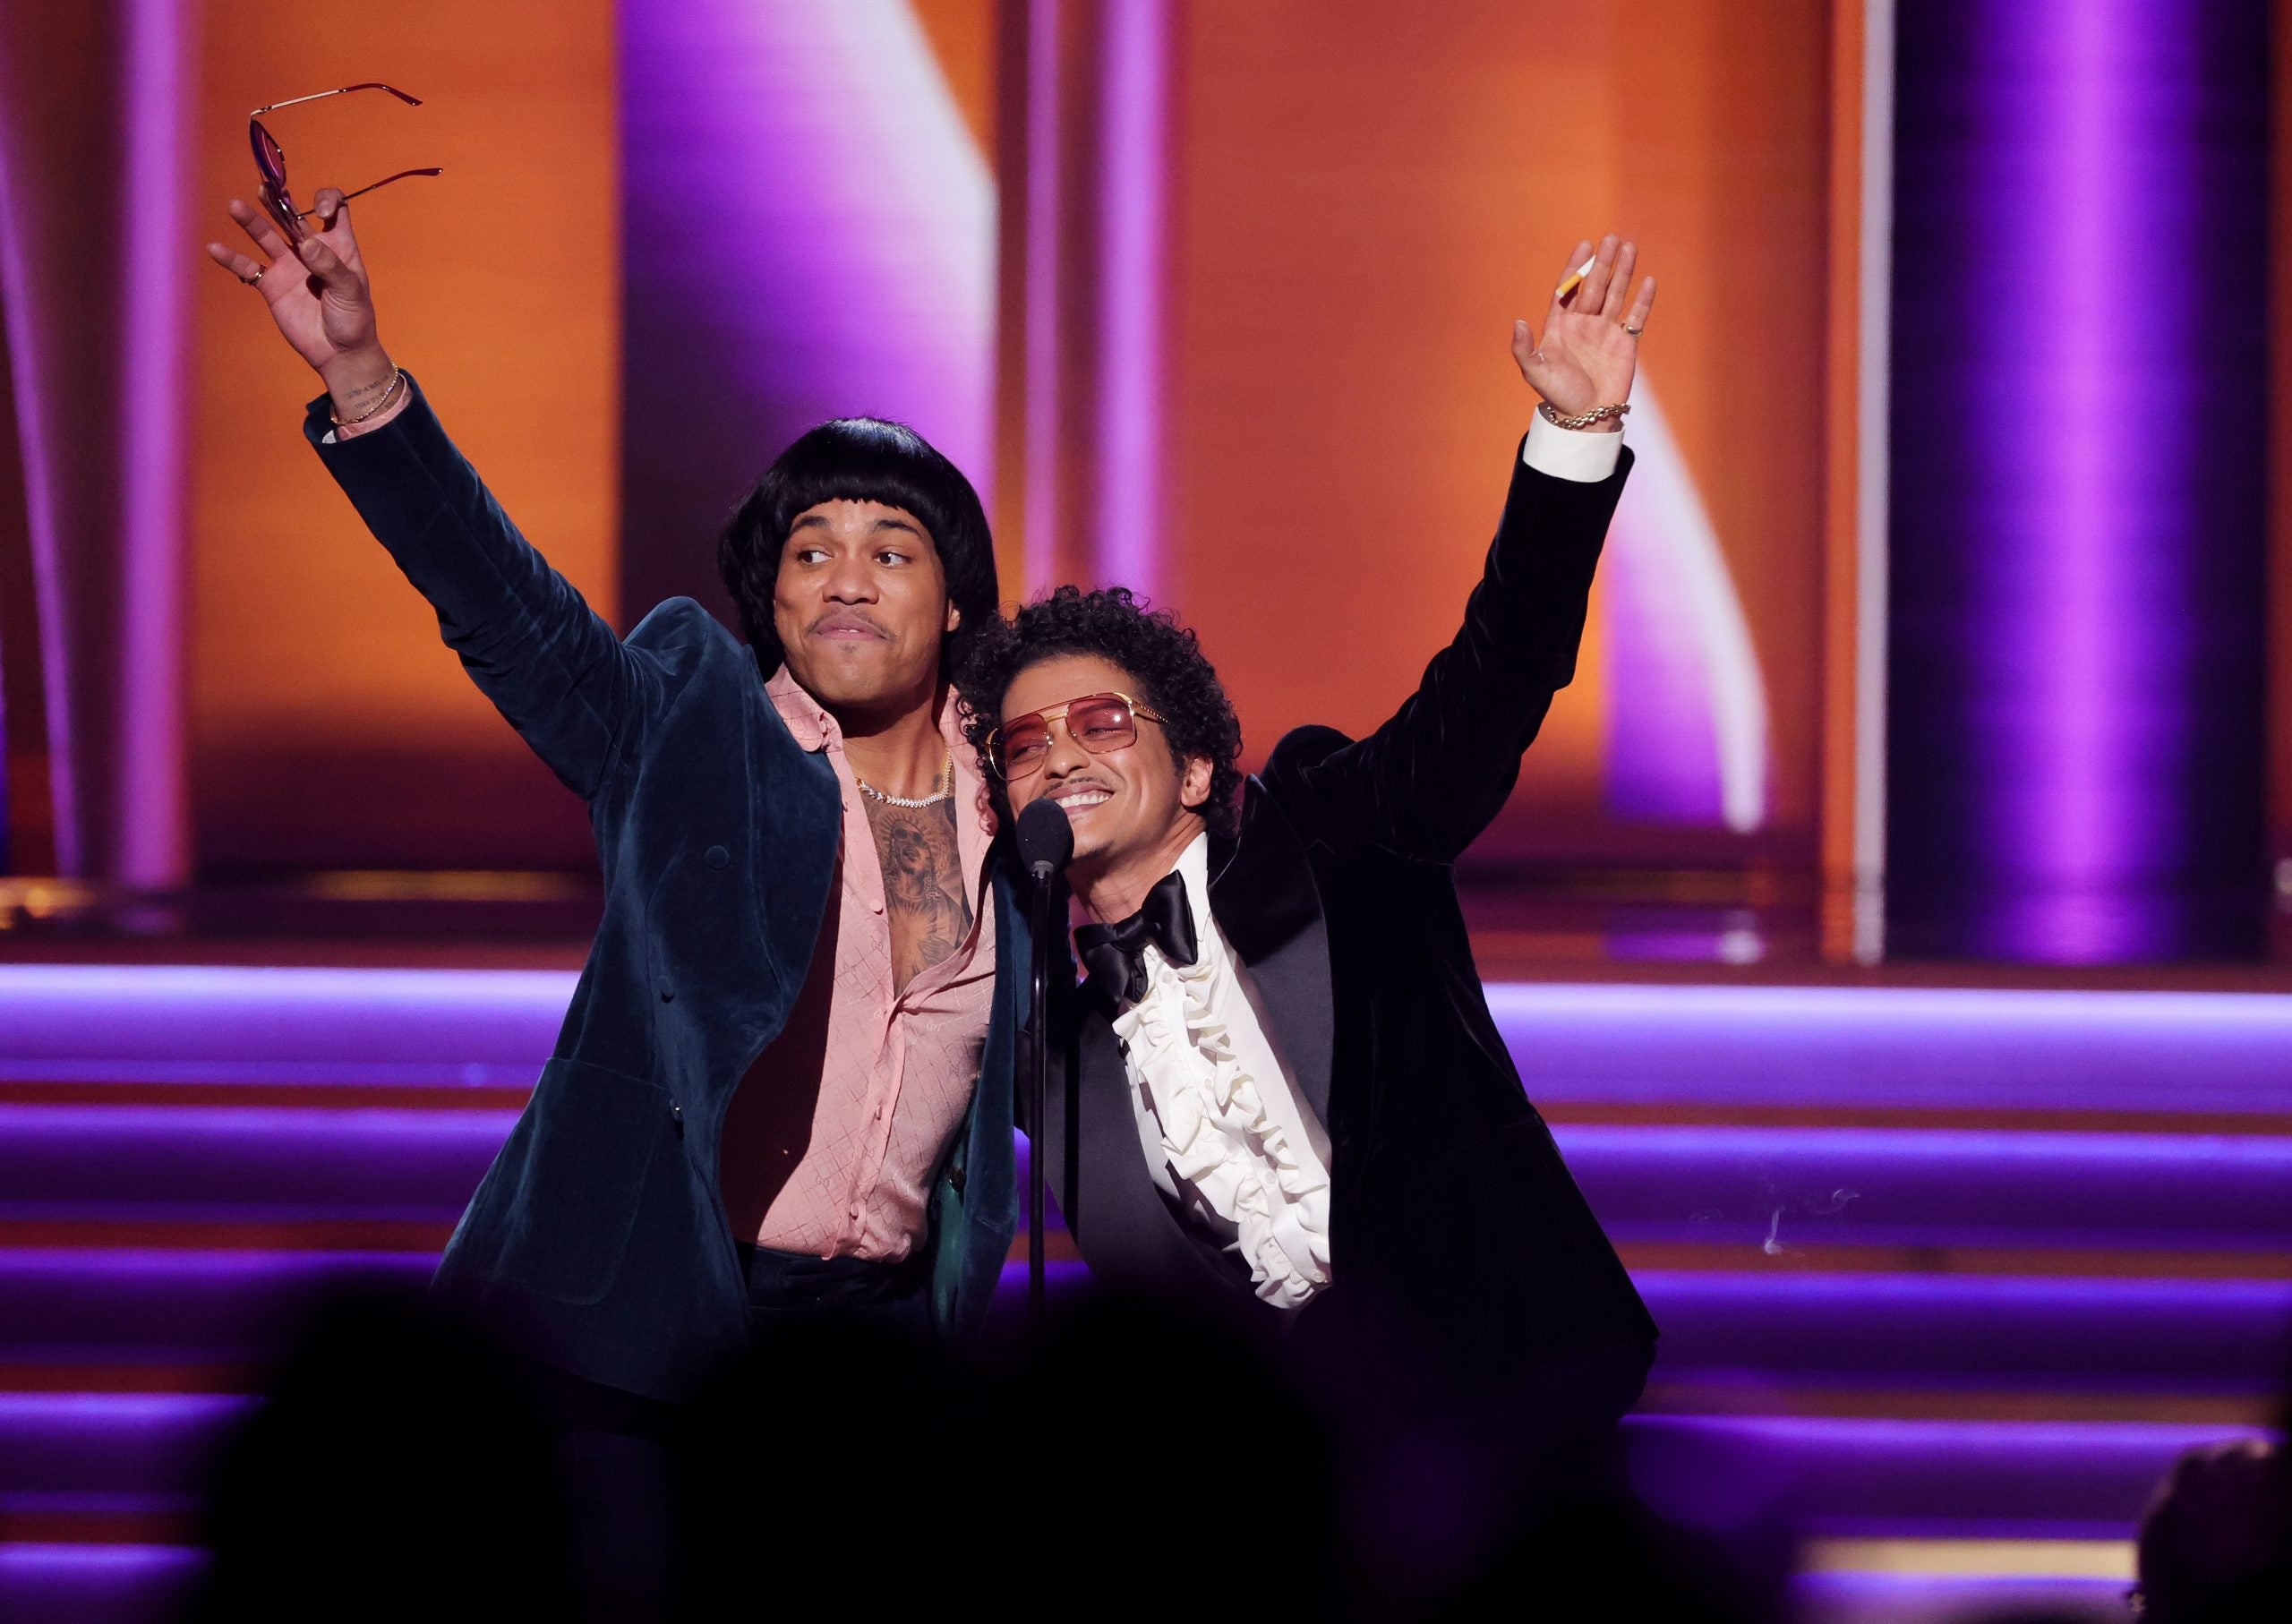 Best Moments From the 64th Annual Grammy Awards